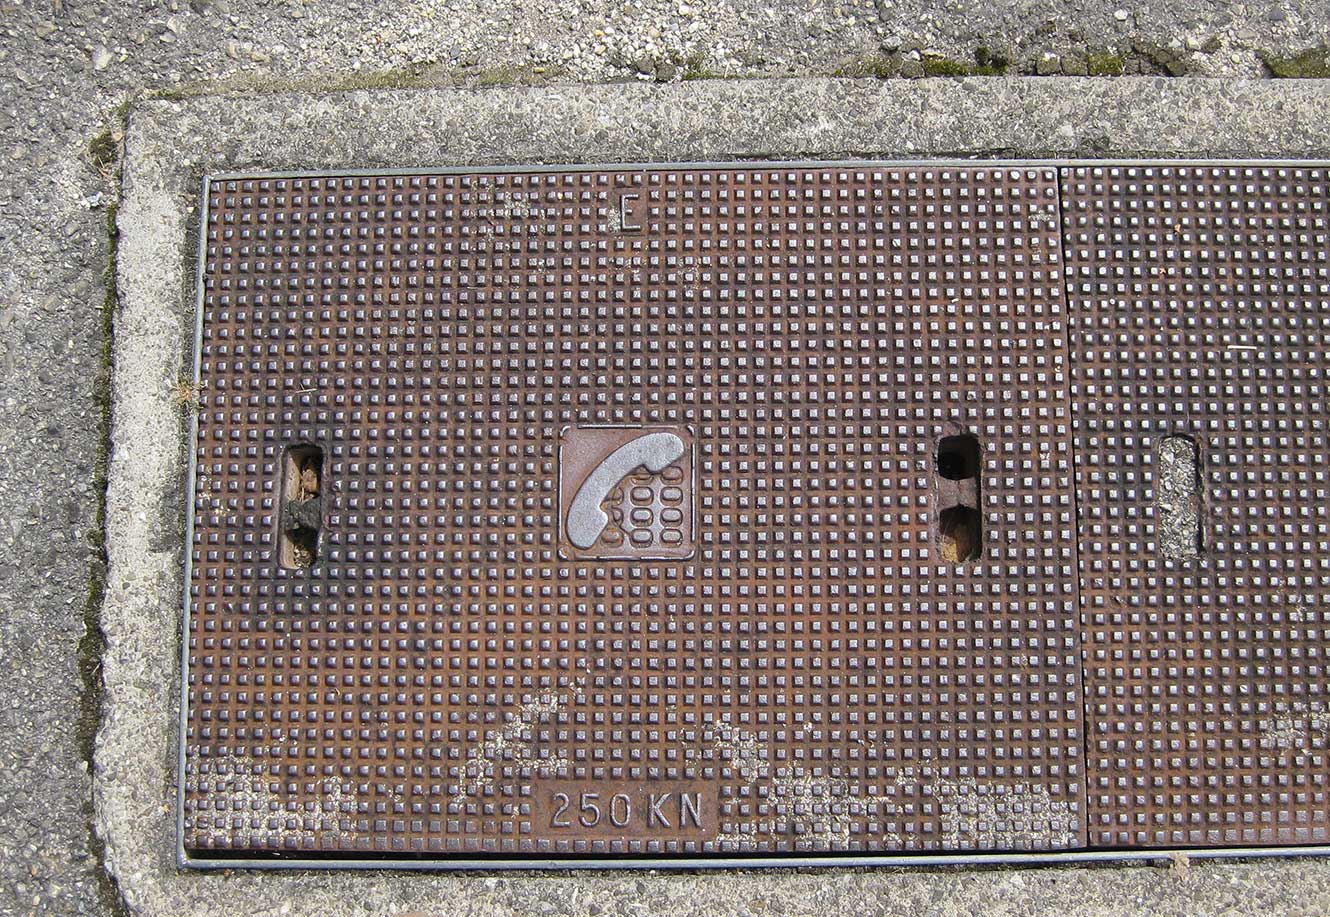 an access panel in the road